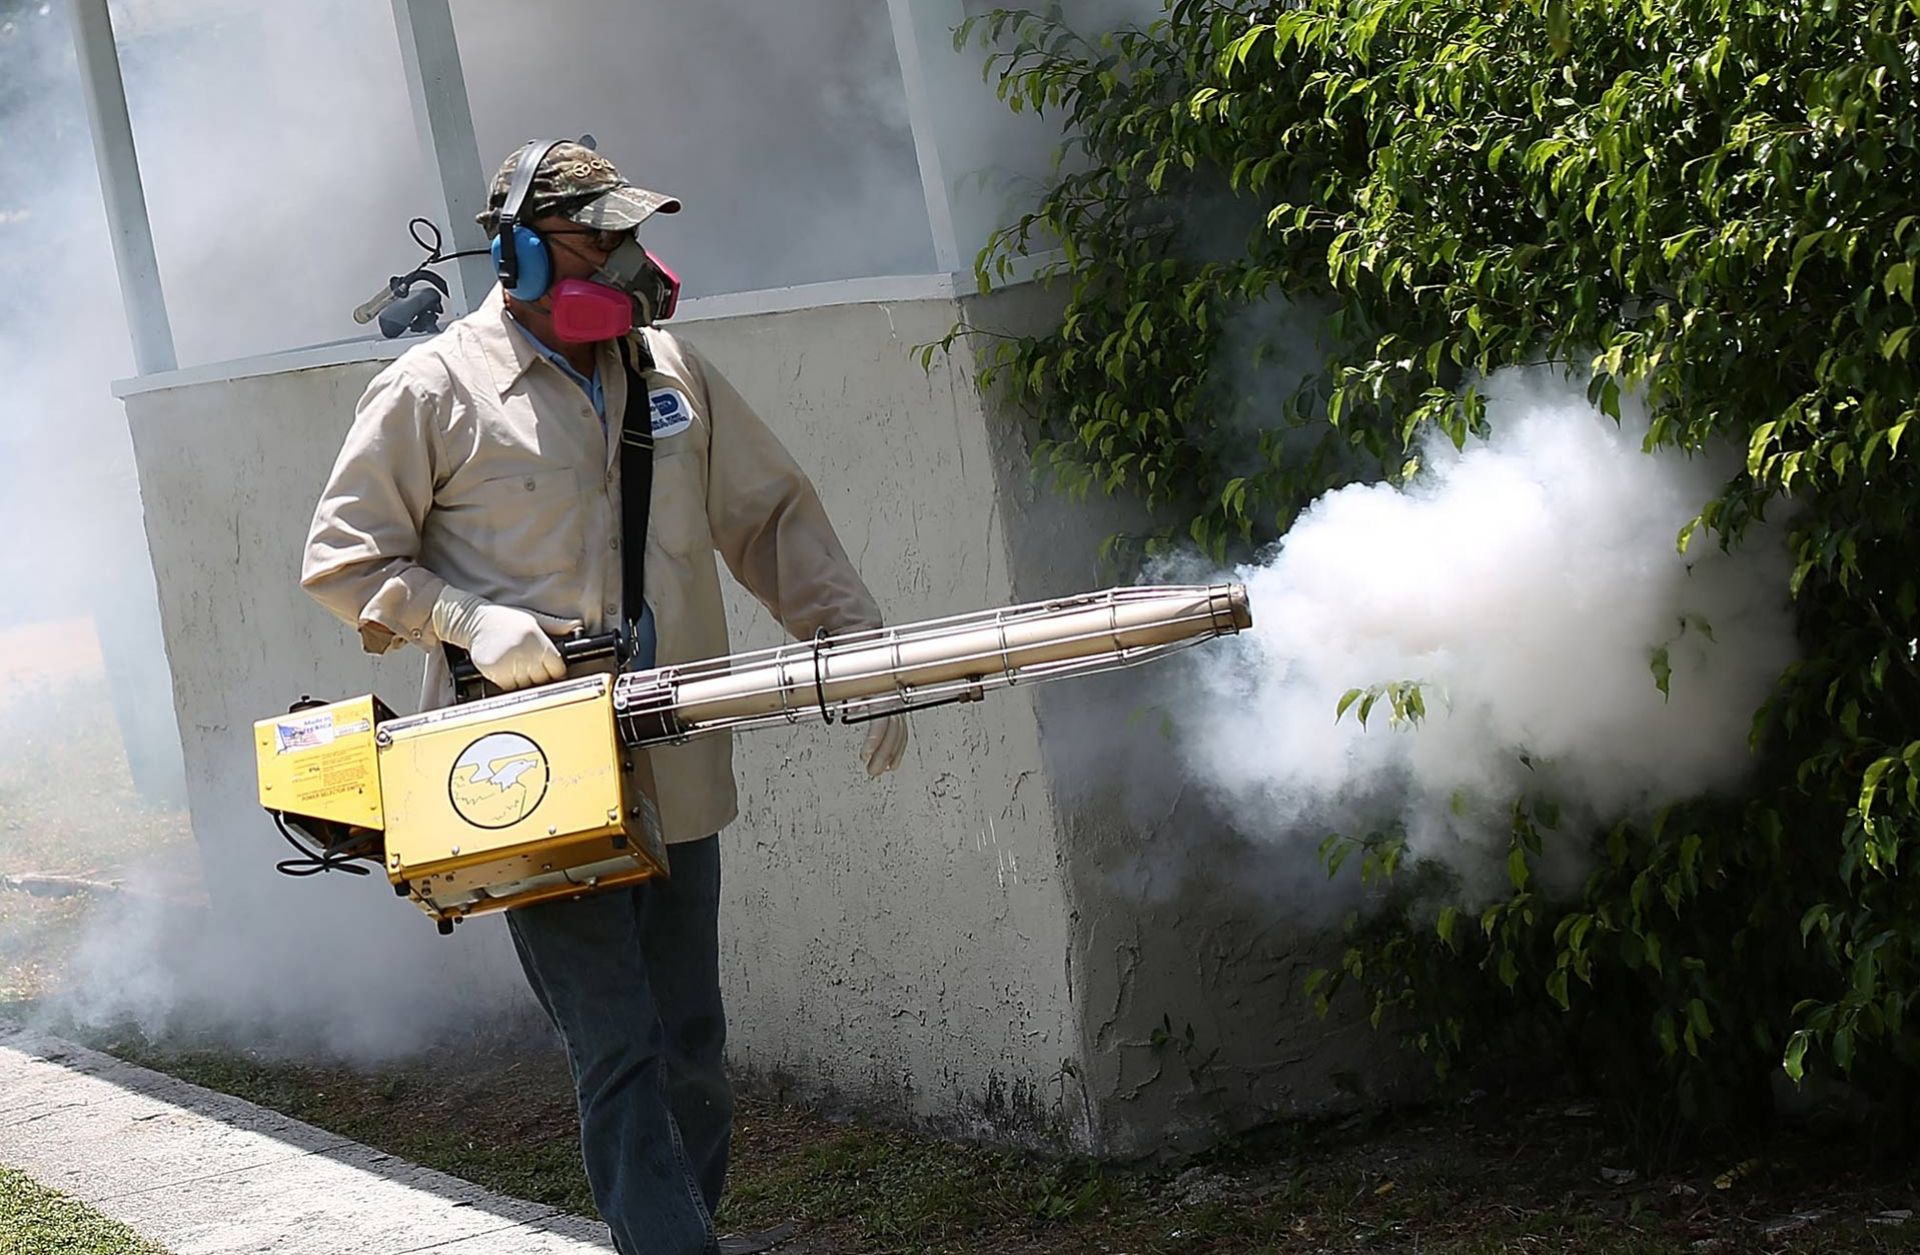 Mosquito control efforts have been focused on the neighborhood in Miami, Florida, where several cases of Zika were reported. The chances of an outbreak stemming from additional travel due to the Olympics in Brazil are slim. Control efforts in North America will keep the outbreak localized, all while scientists learn how the disease works. 